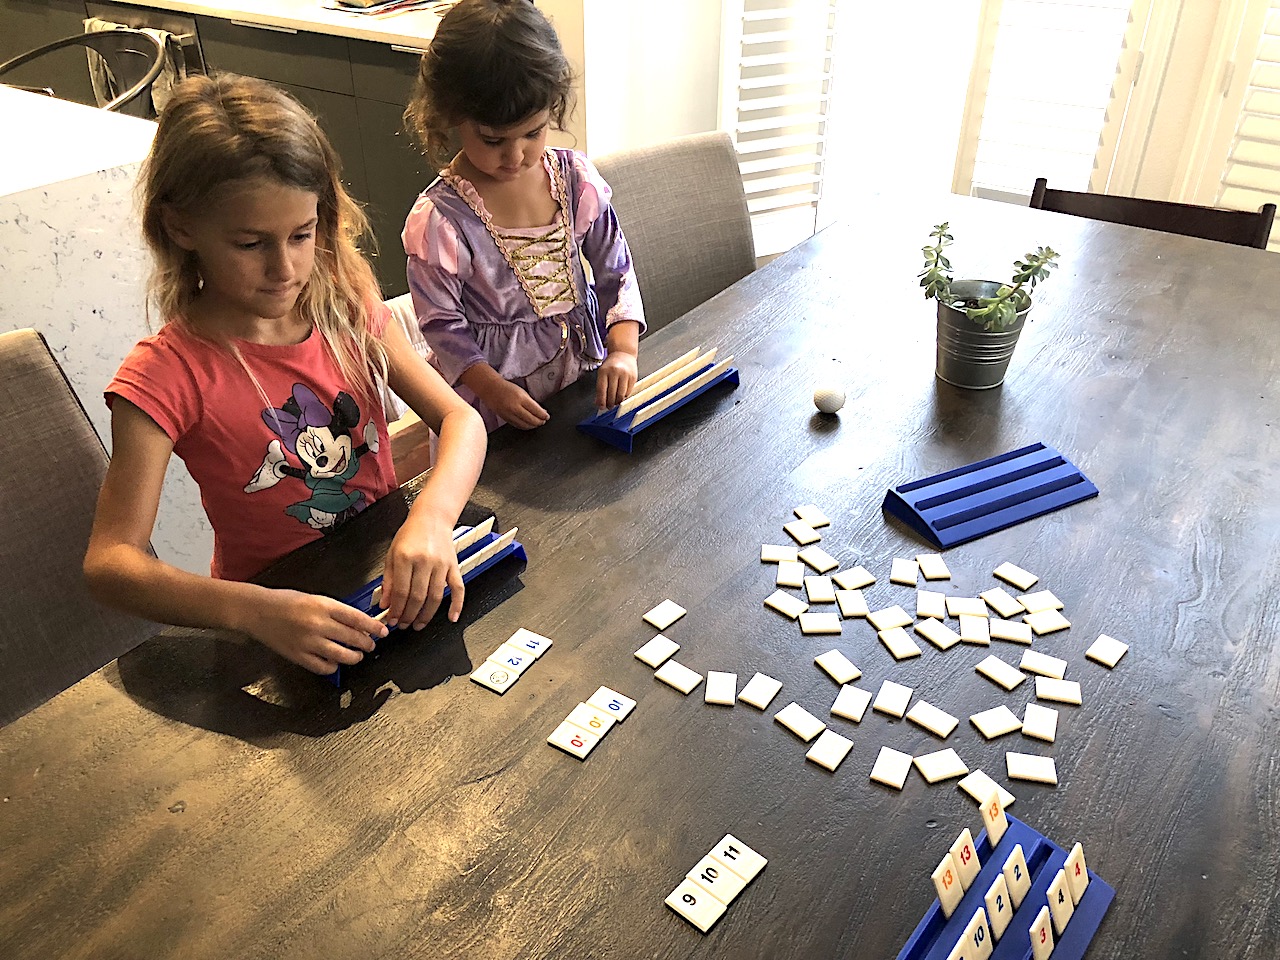 3 Classic Board Games for the Entire Family | find fun board games the whole family can play together | Rummikub | Mastermind |TriOminos | Best board games for kids | #boardgames #familyboardgames #familygames #pressmantoys #rummikub #mastermind #triominos #bestgameswithkids #familyfun